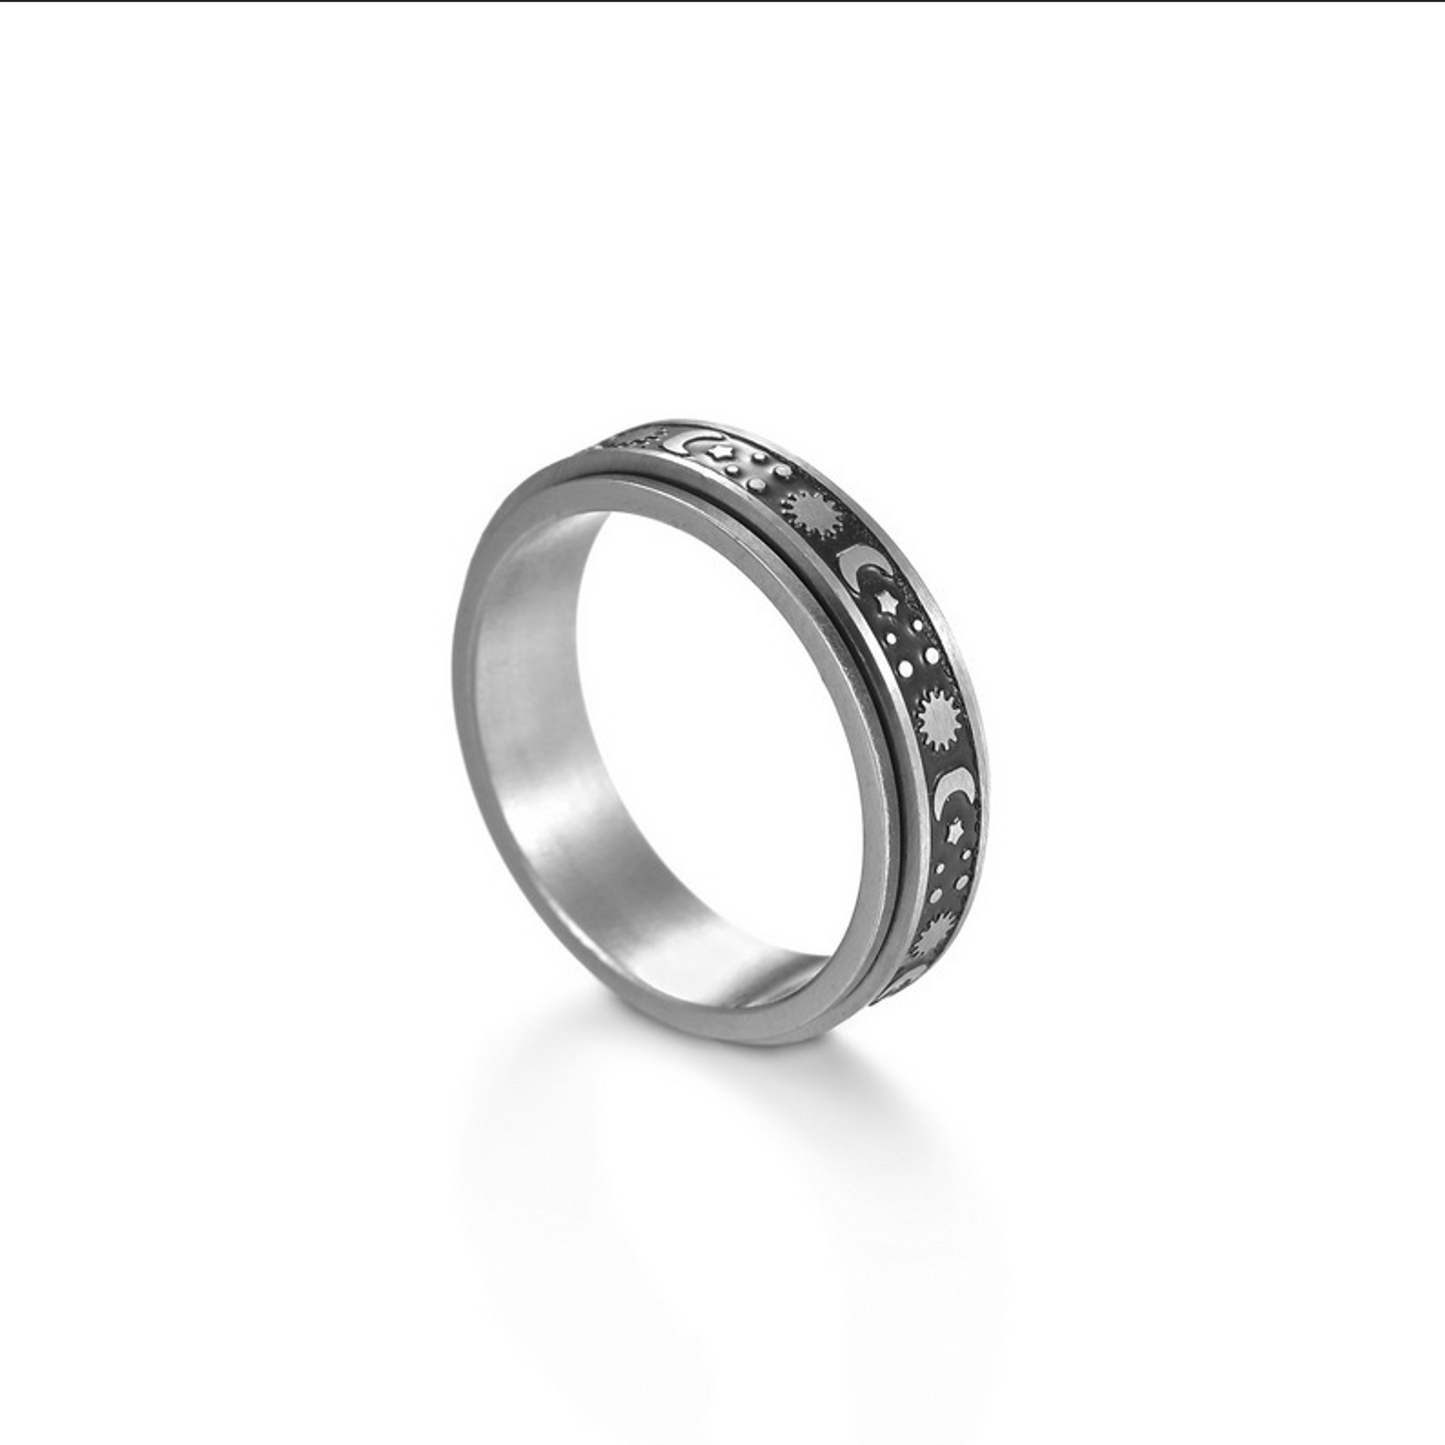 Thin silver outer band, the outer spinning part of the ring has a black background with silver moons, stars, and suns across the ring